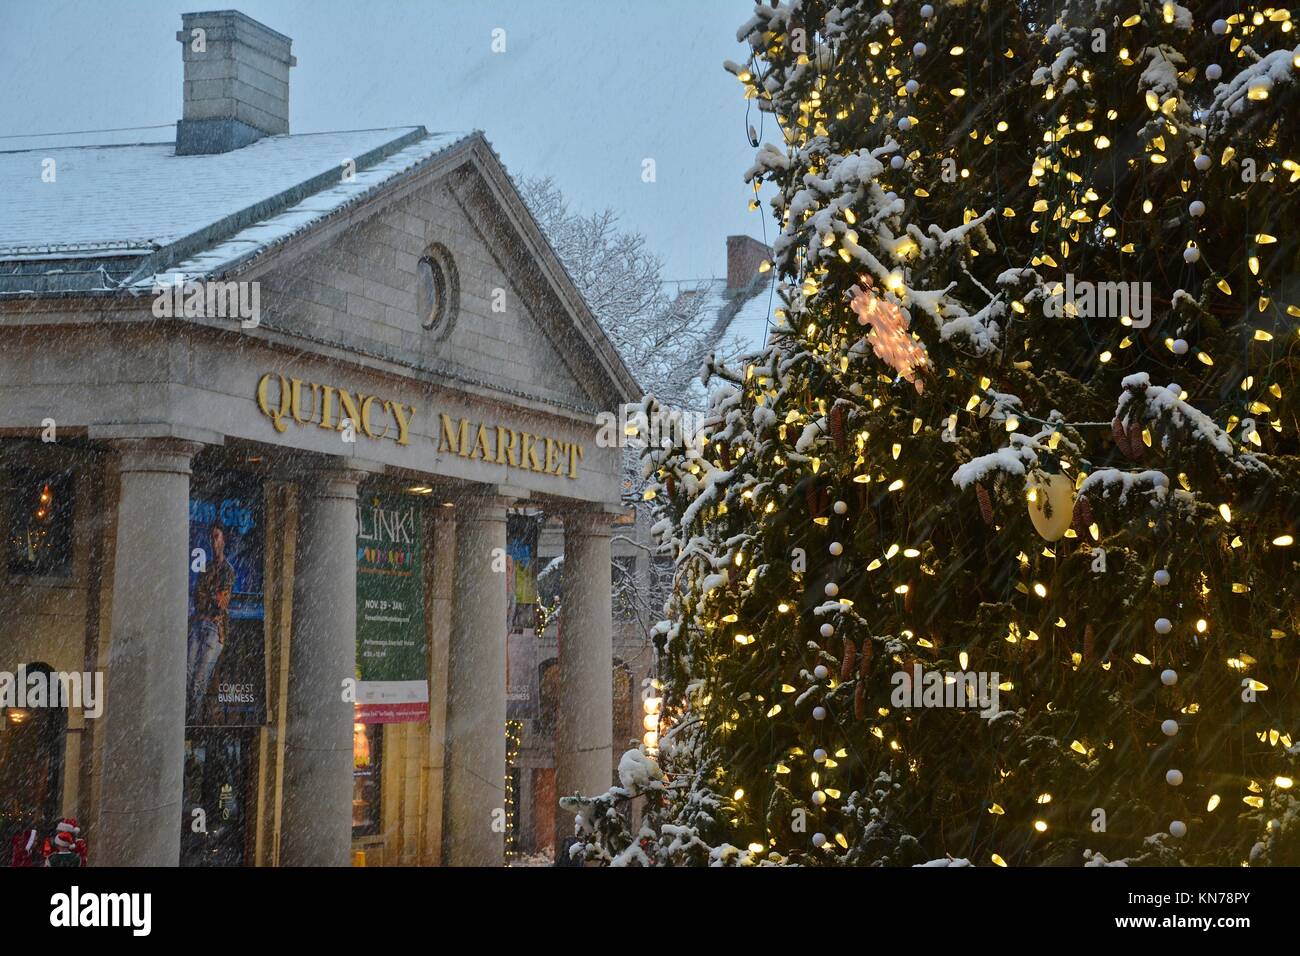 The iconic Faneuil Hall/Quincy Market Christmas tree seen in downtown Boston during the first snow storm of December.  Boston, Massachusetts, USA Stock Photo